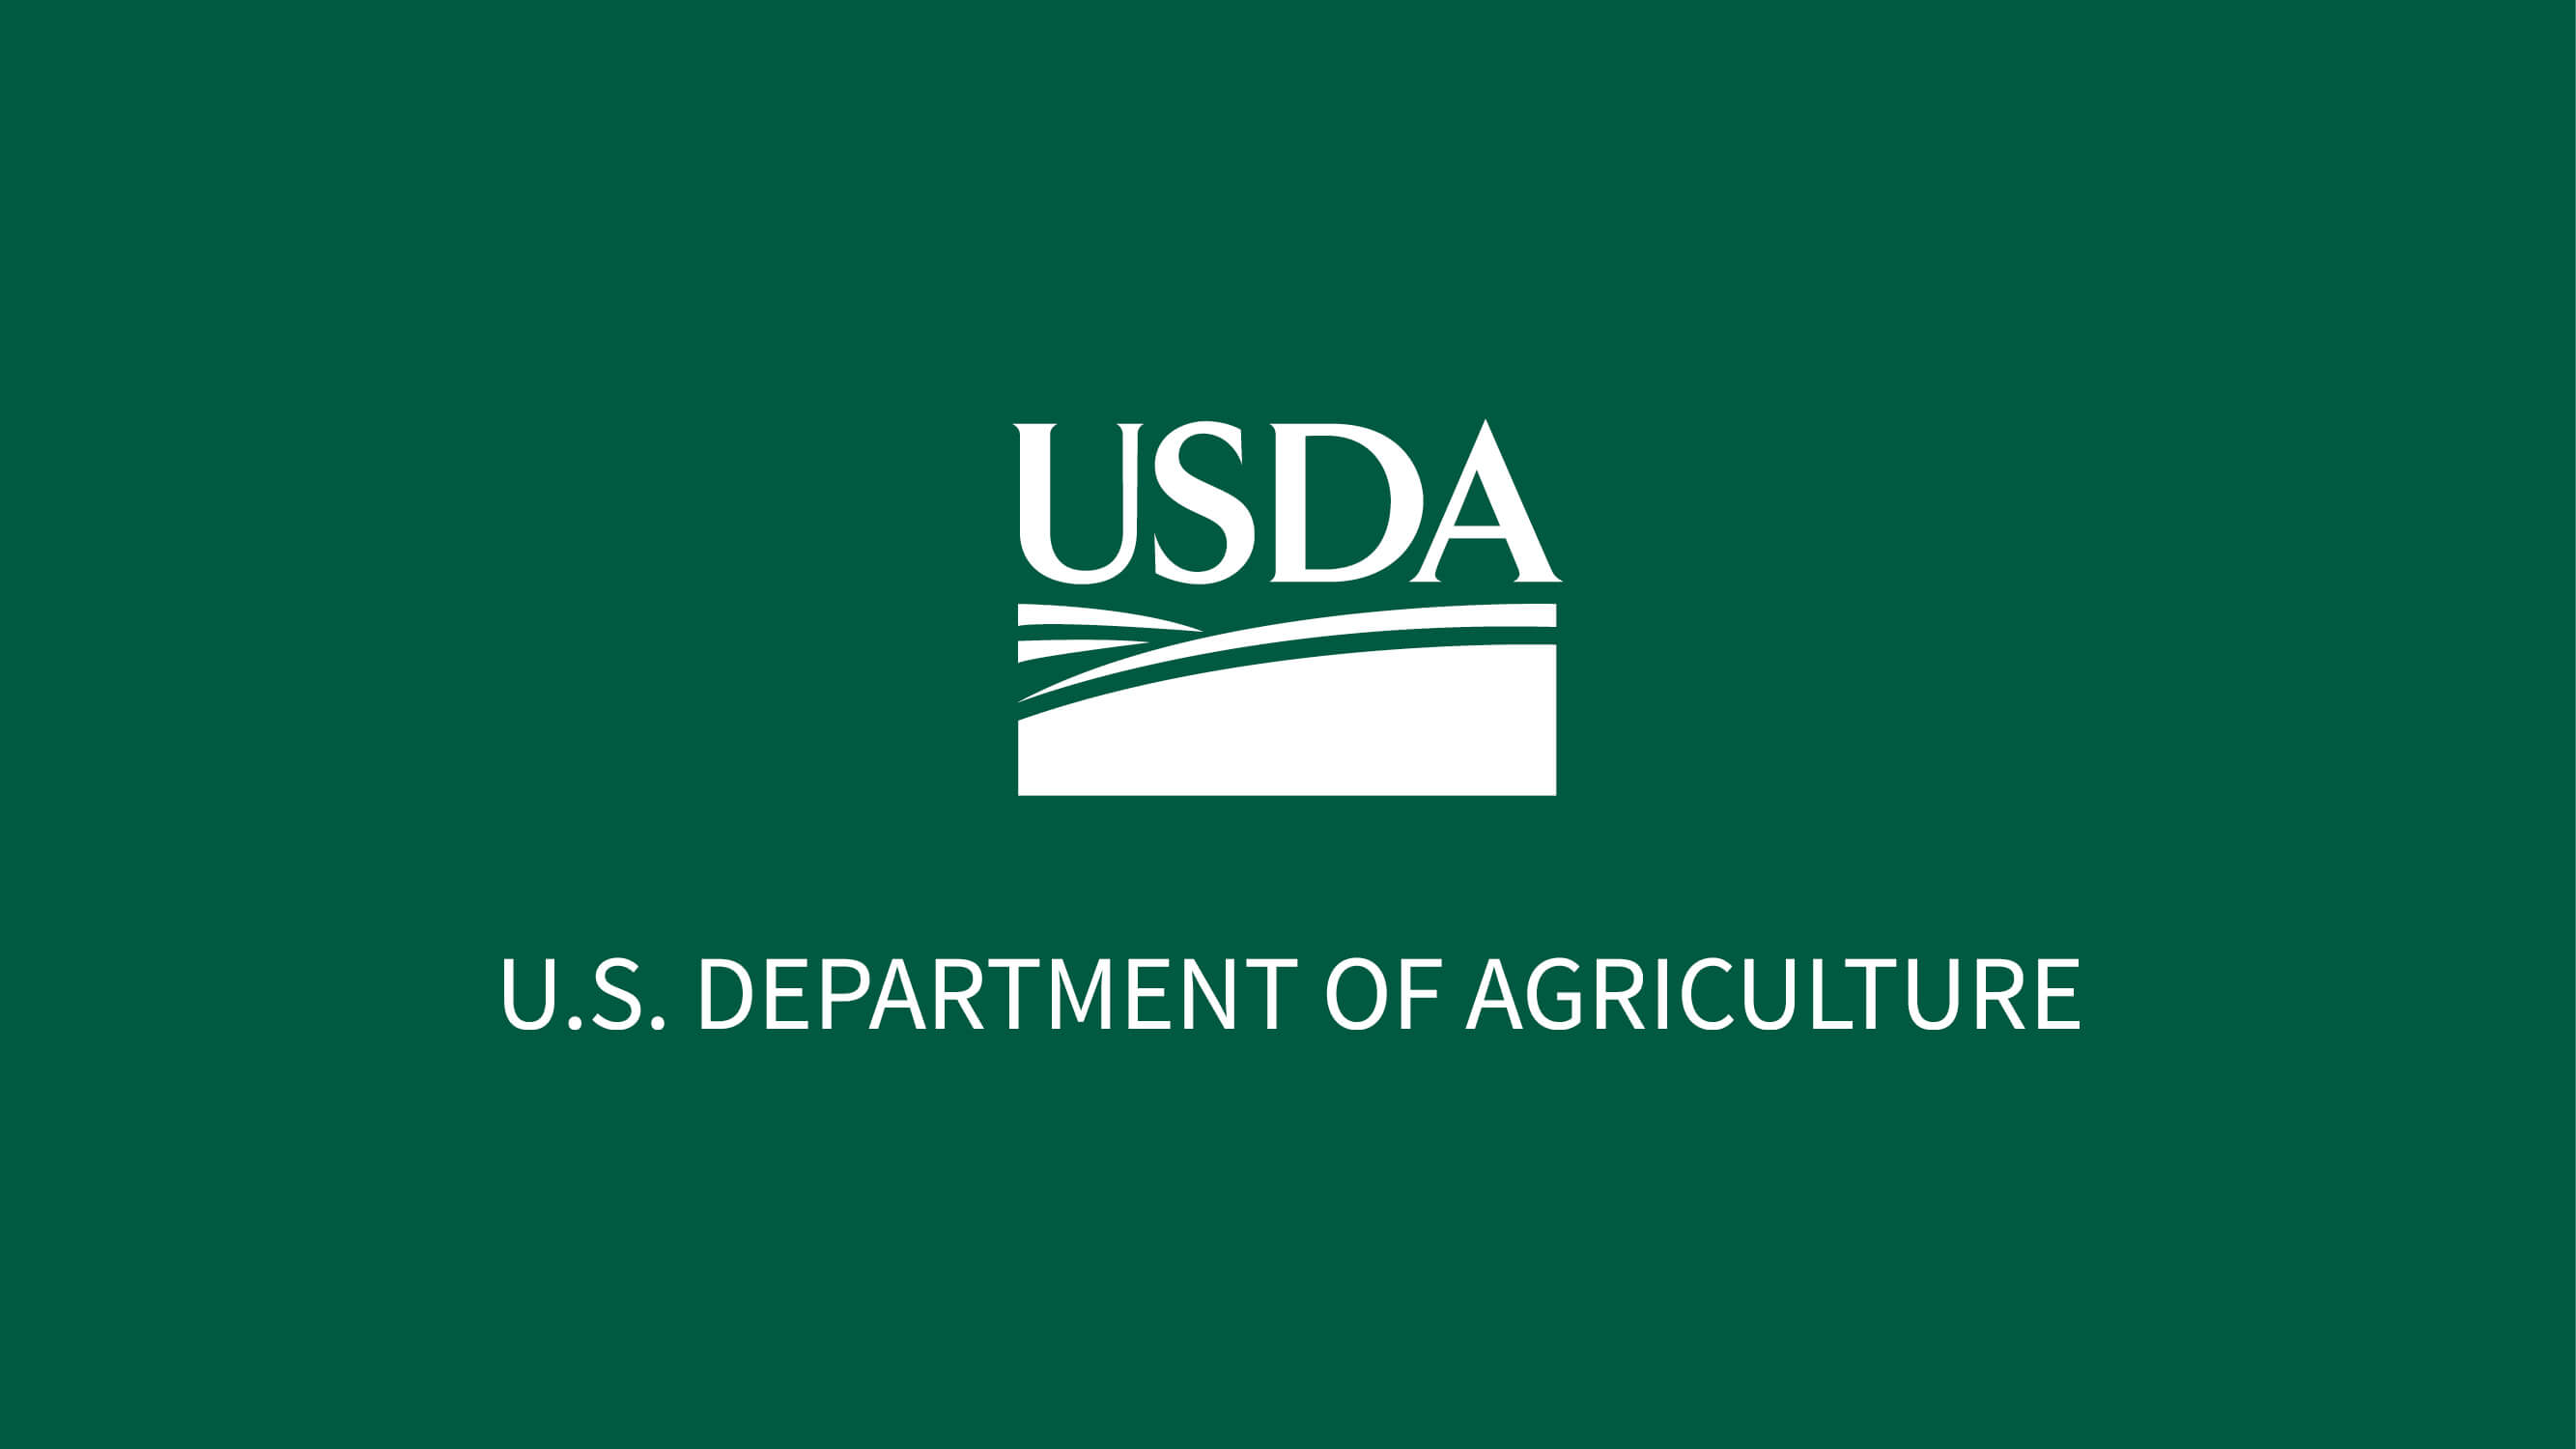 Statement of Agriculture Secretary Tom Vilsack regarding the Intent To Nominate Stacy Dean as Under Secretary Food, Nutrition, and Consumer Services thumbnail